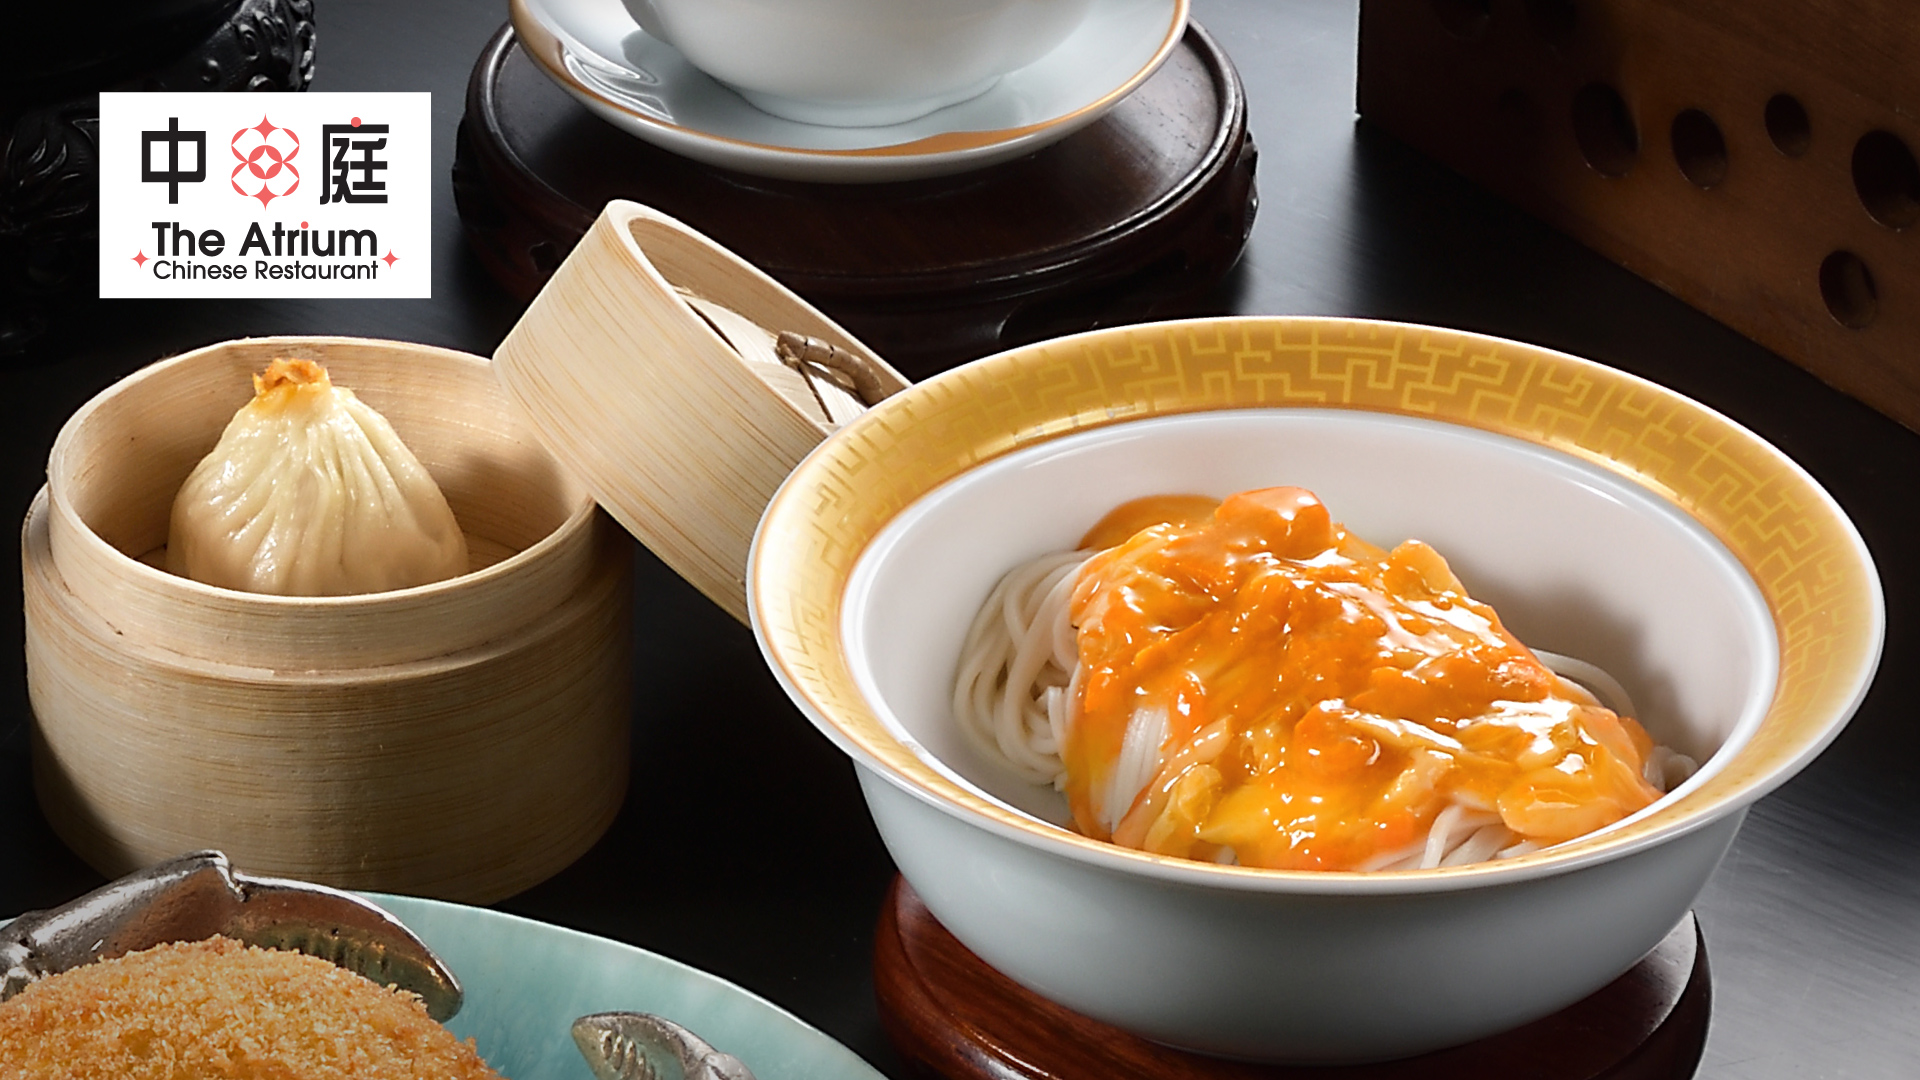 【Up to 25% off】The Atrium Chinese Restaurant l Dinner Set